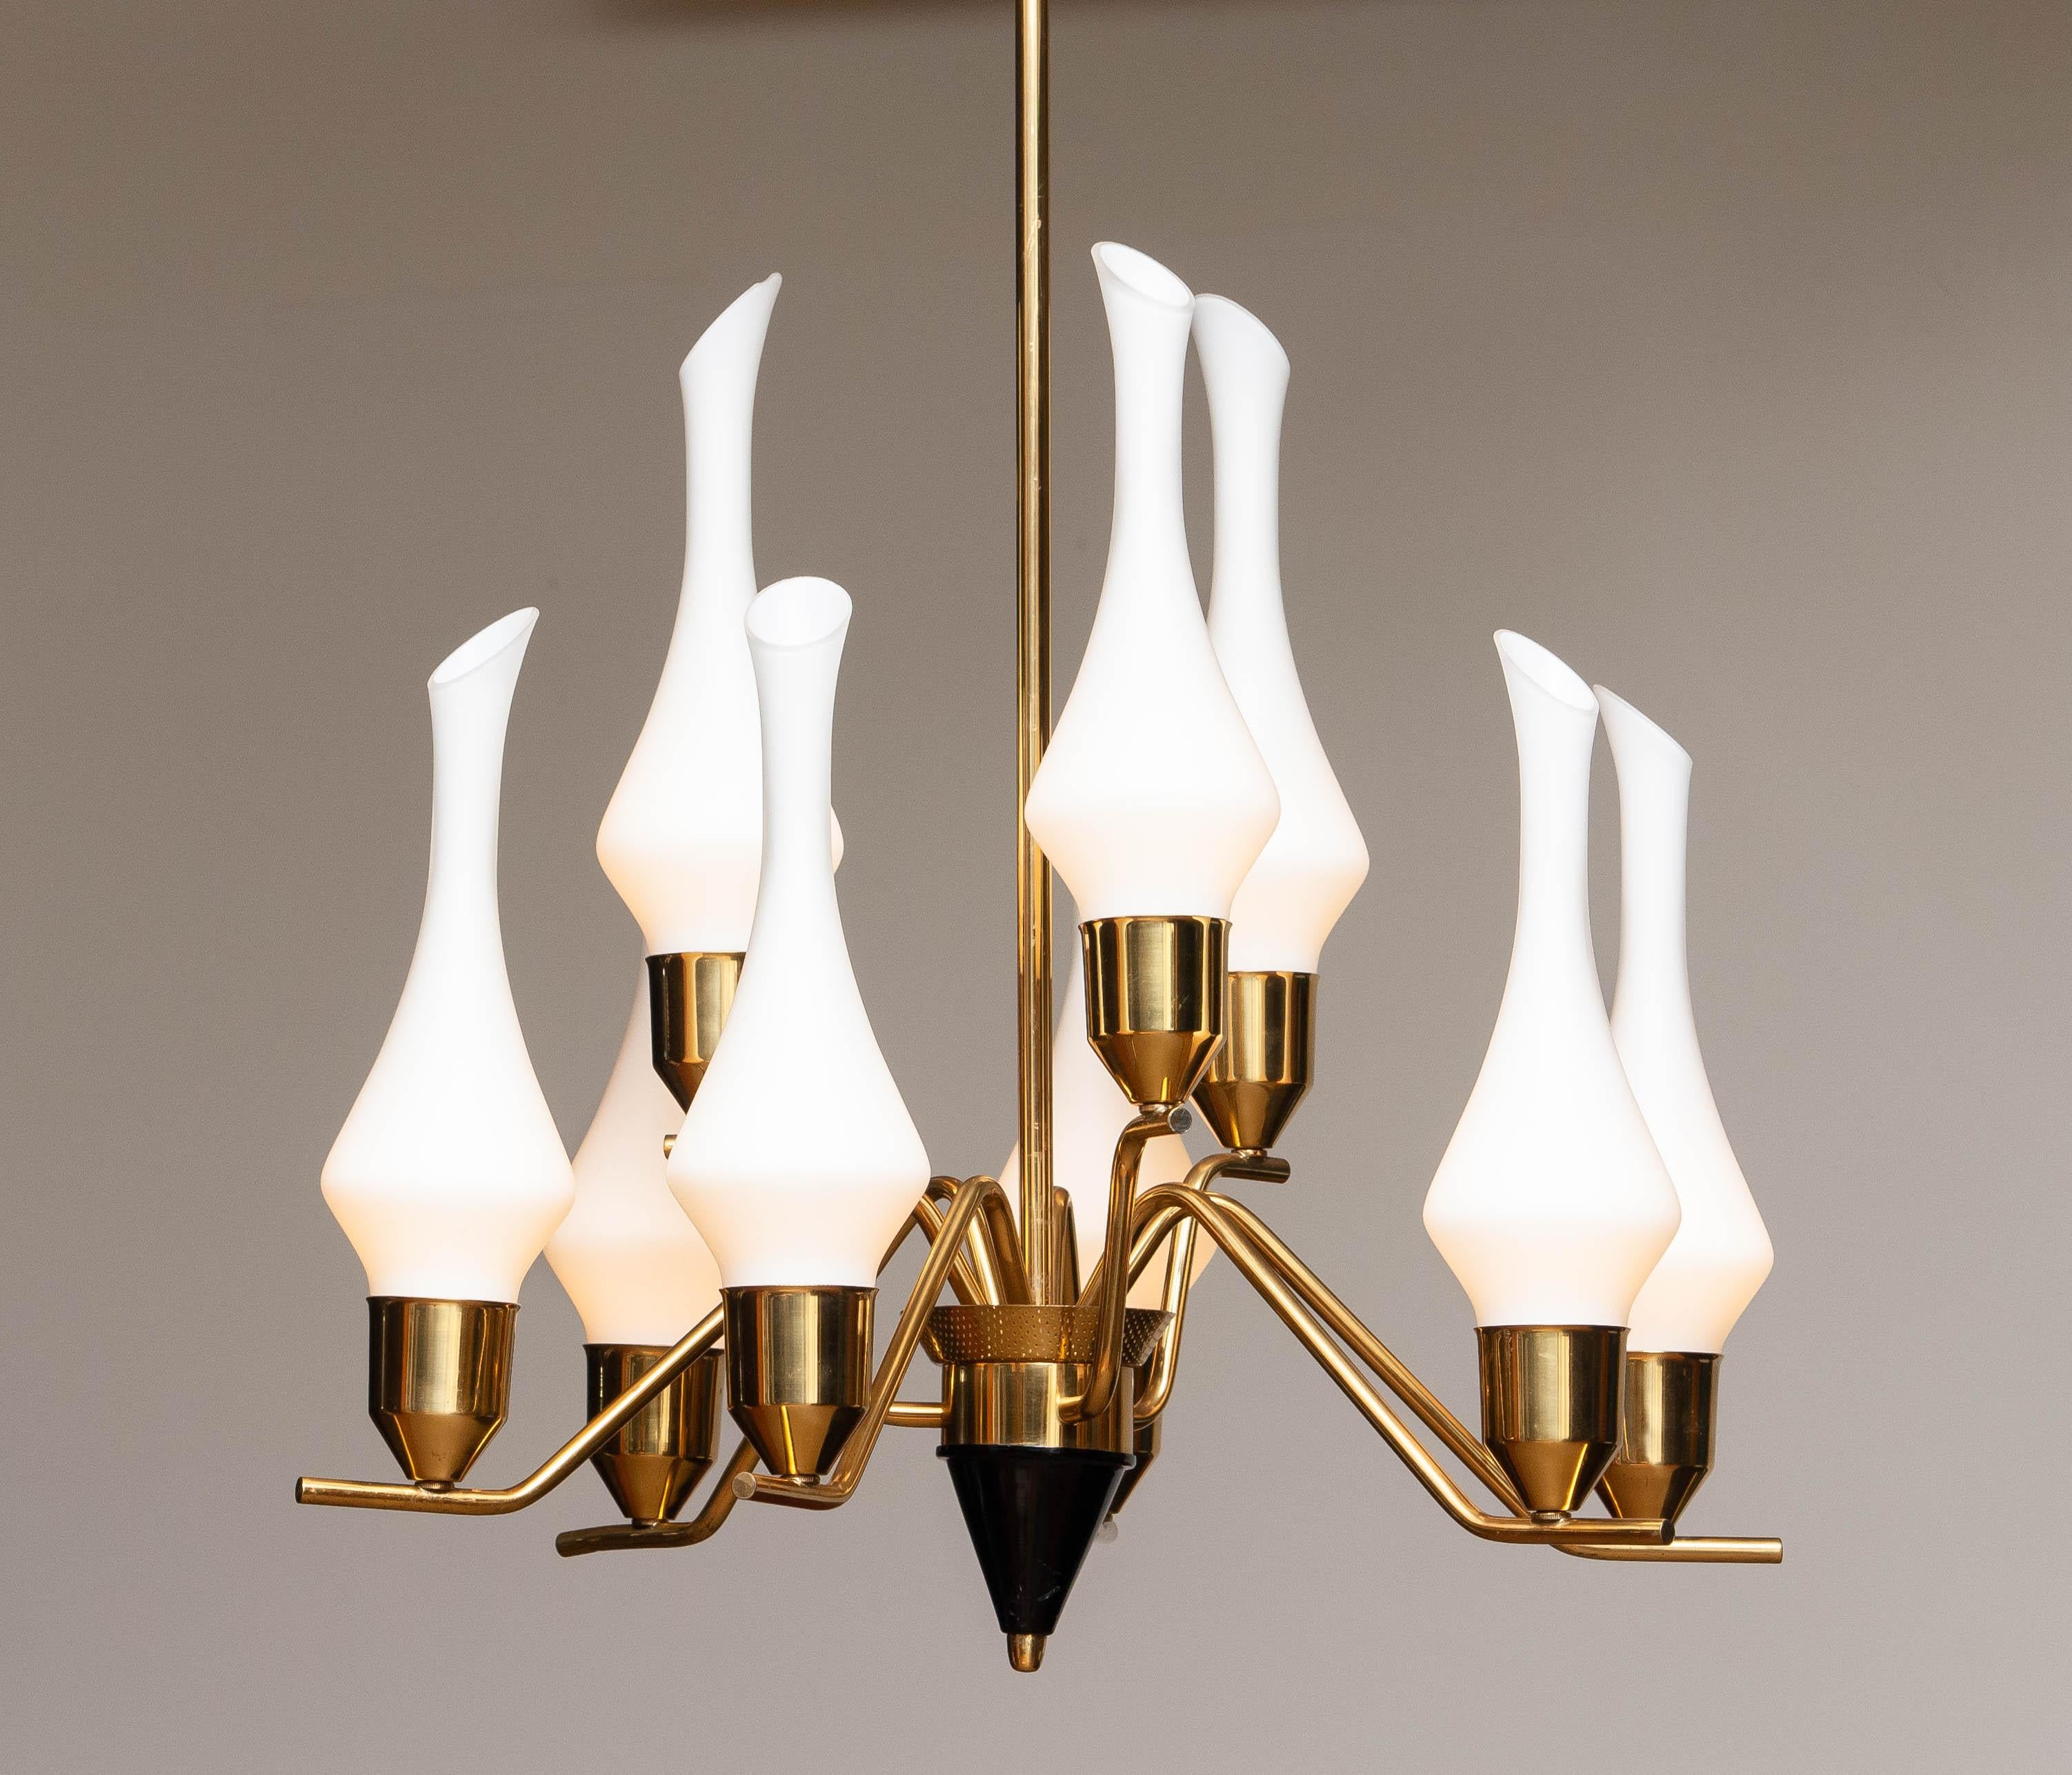 1960's Swedish Brass Chandelier with White Frosted Organic Glass Vases, ASEA In Good Condition In Silvolde, Gelderland